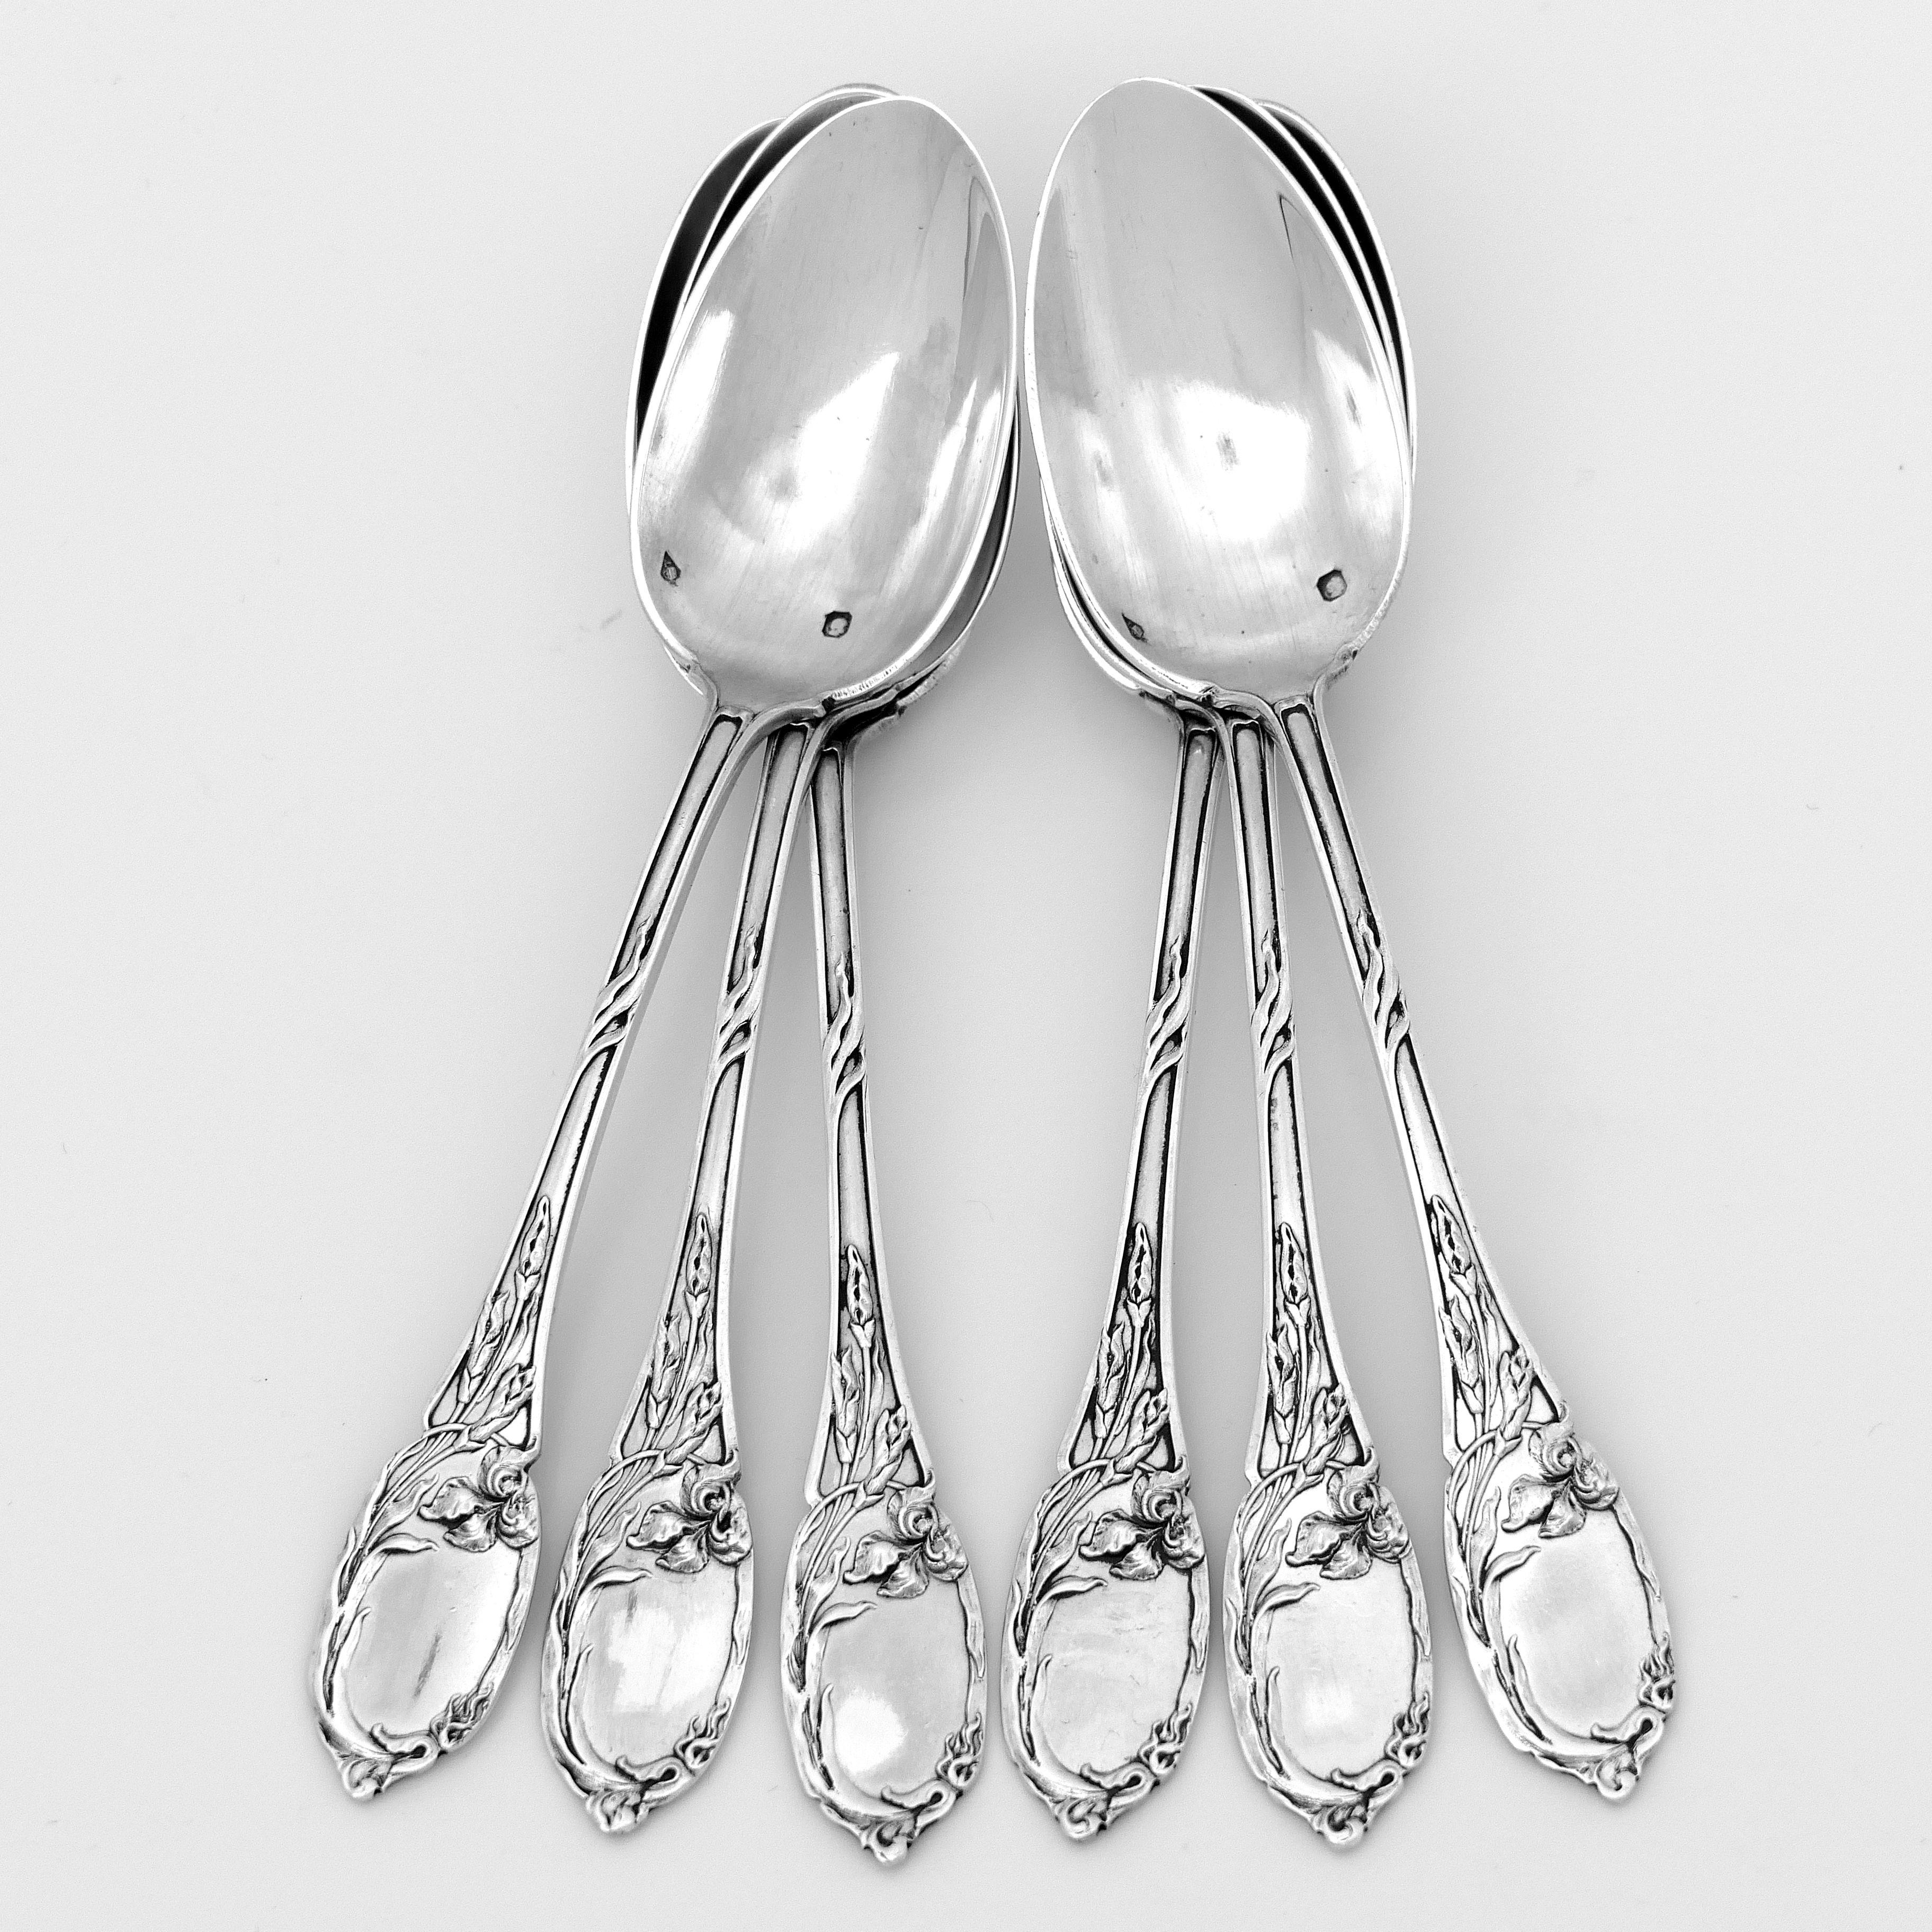 Tirbour Rare French Sterling Silver Dessert Coffee Spoons Set 6 Pc, Iris 4